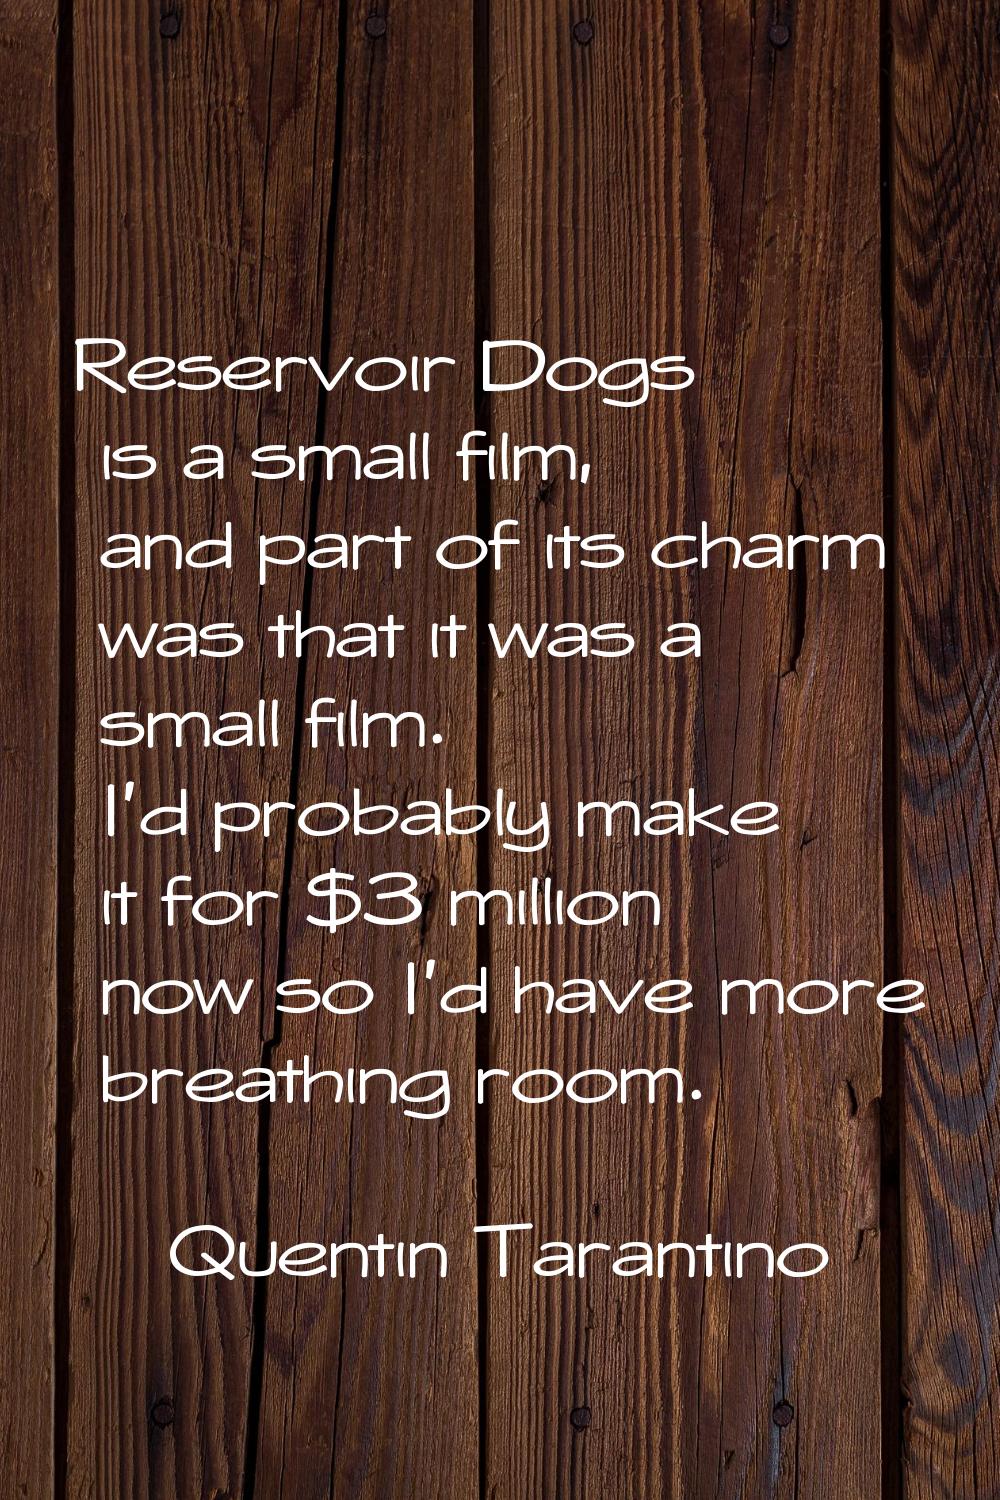 Reservoir Dogs is a small film, and part of its charm was that it was a small film. I'd probably ma